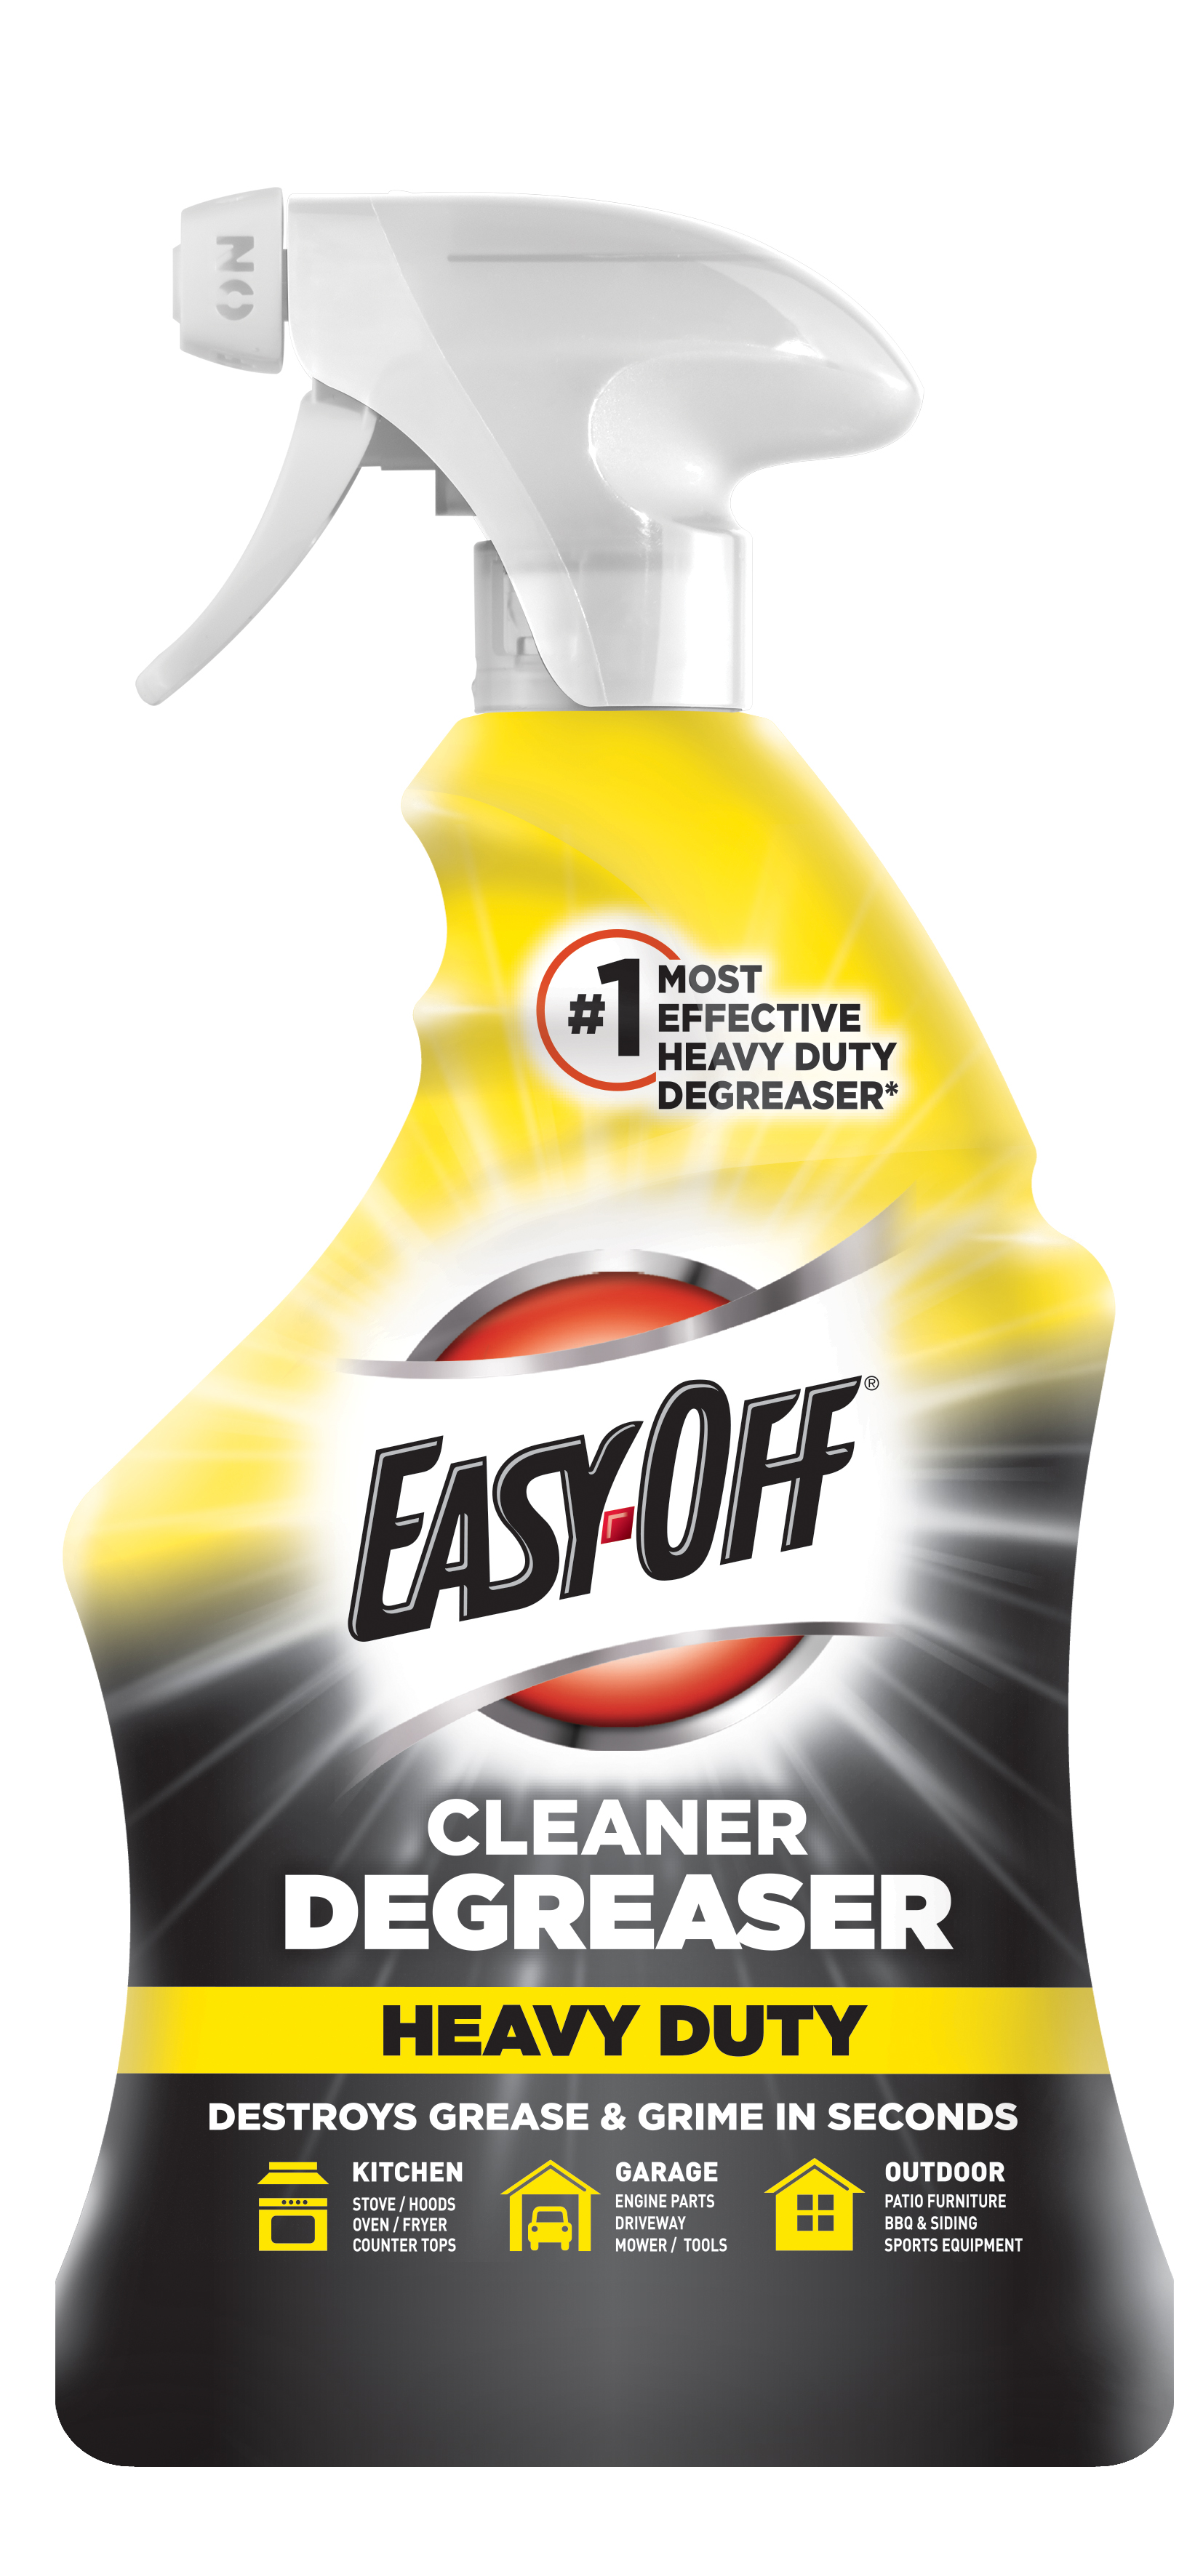 EASYOFF Heavy Duty Cleaner Degreaser Trigger